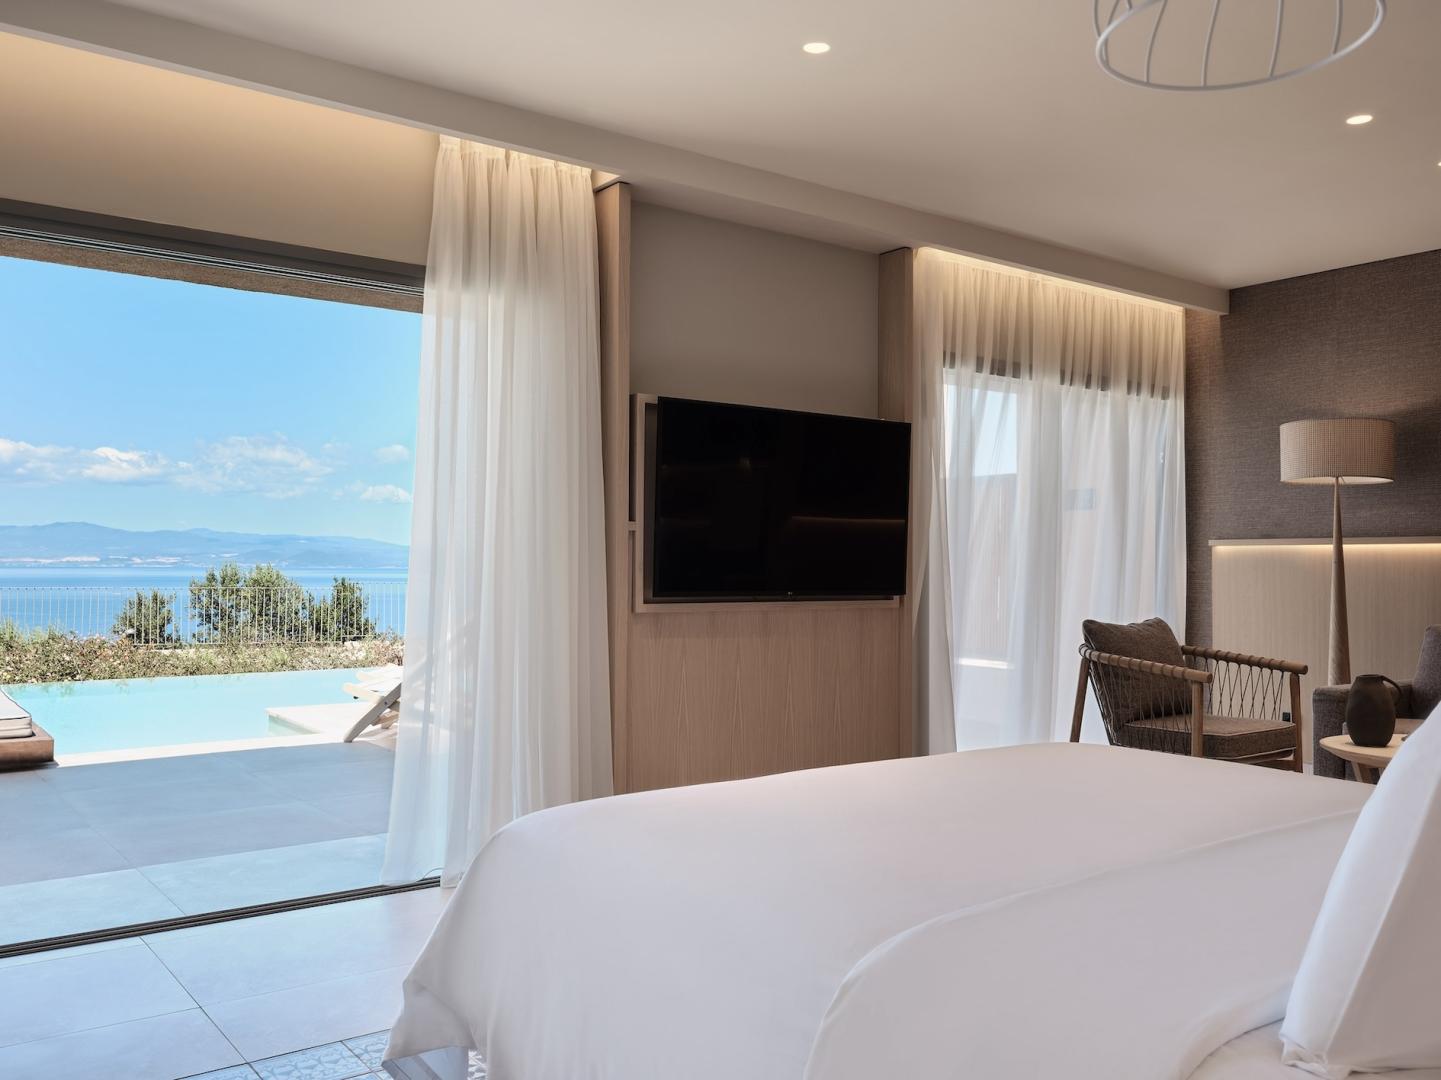 One-Bedroom Panoramic Suite with Sea View, Private Pool & Jacuzzi